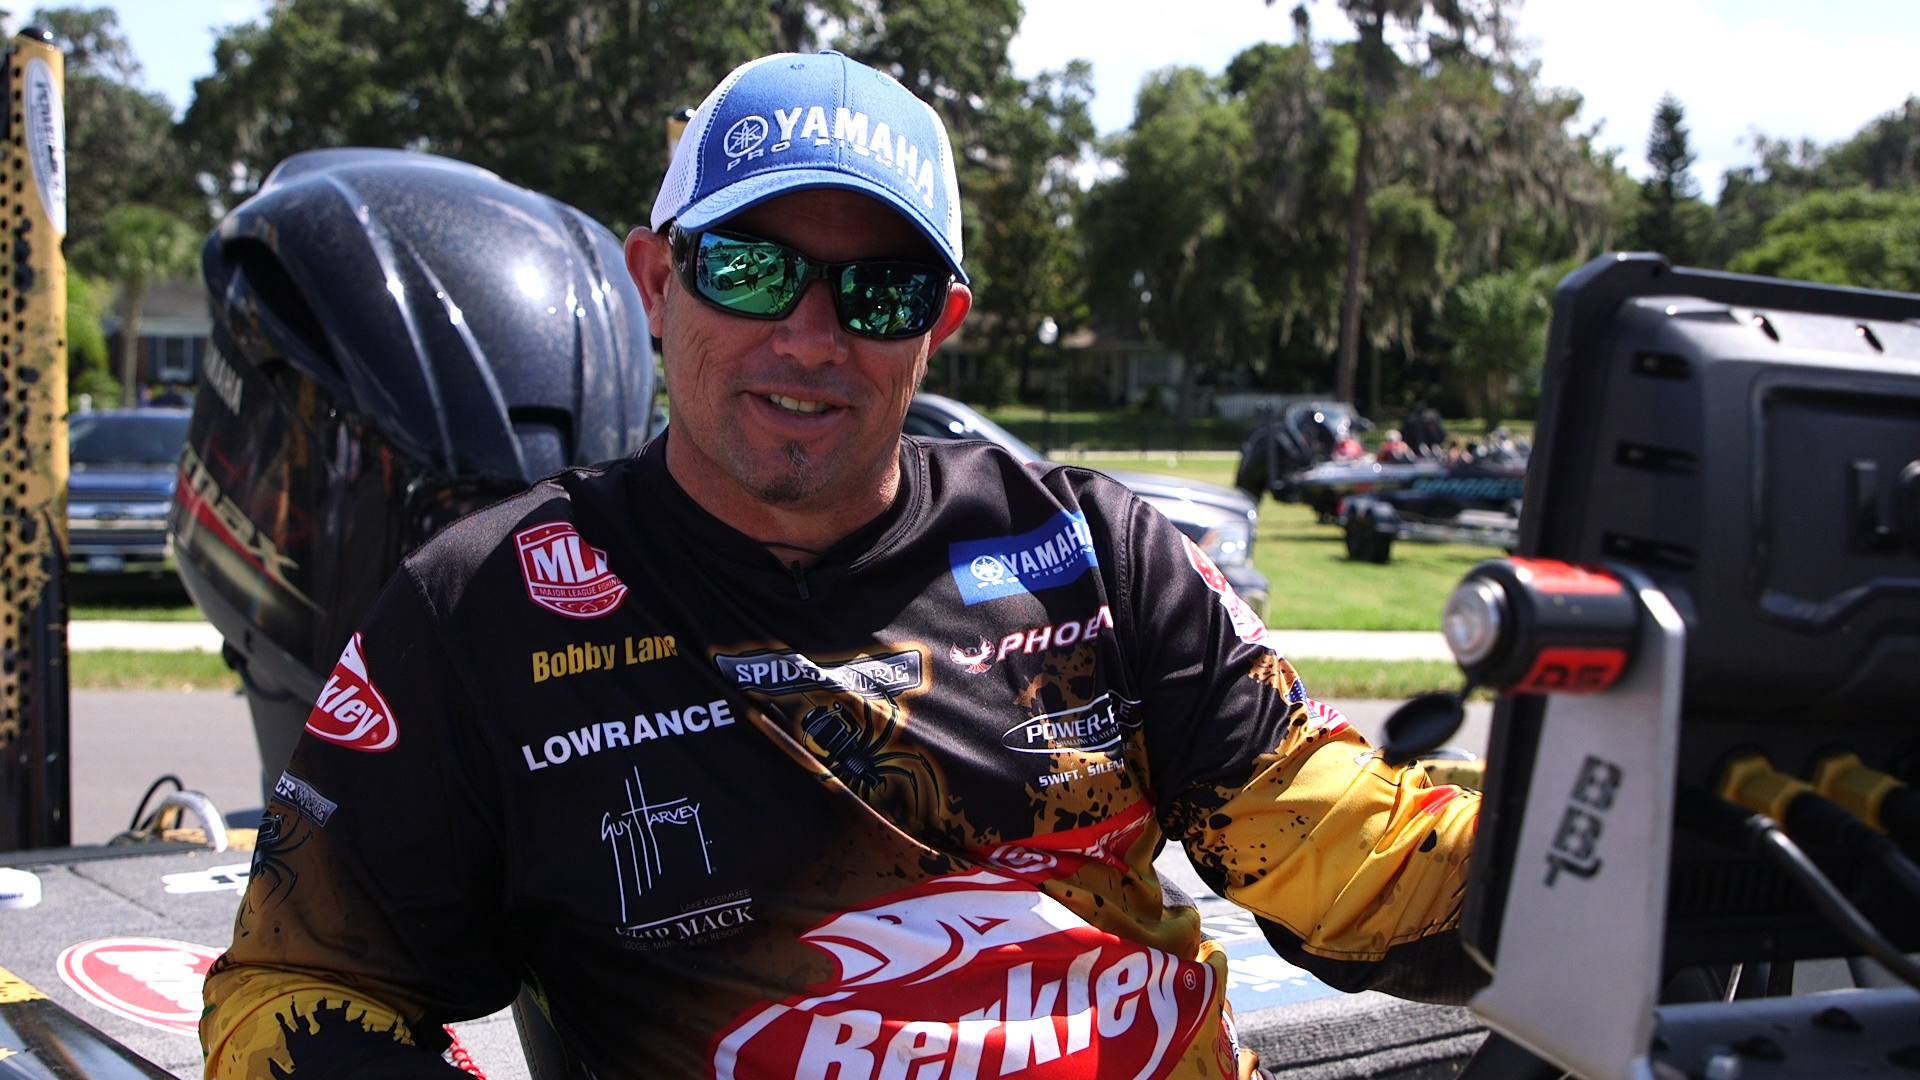 Bobby Lane Gets The Best of Florida - Major League Fishing